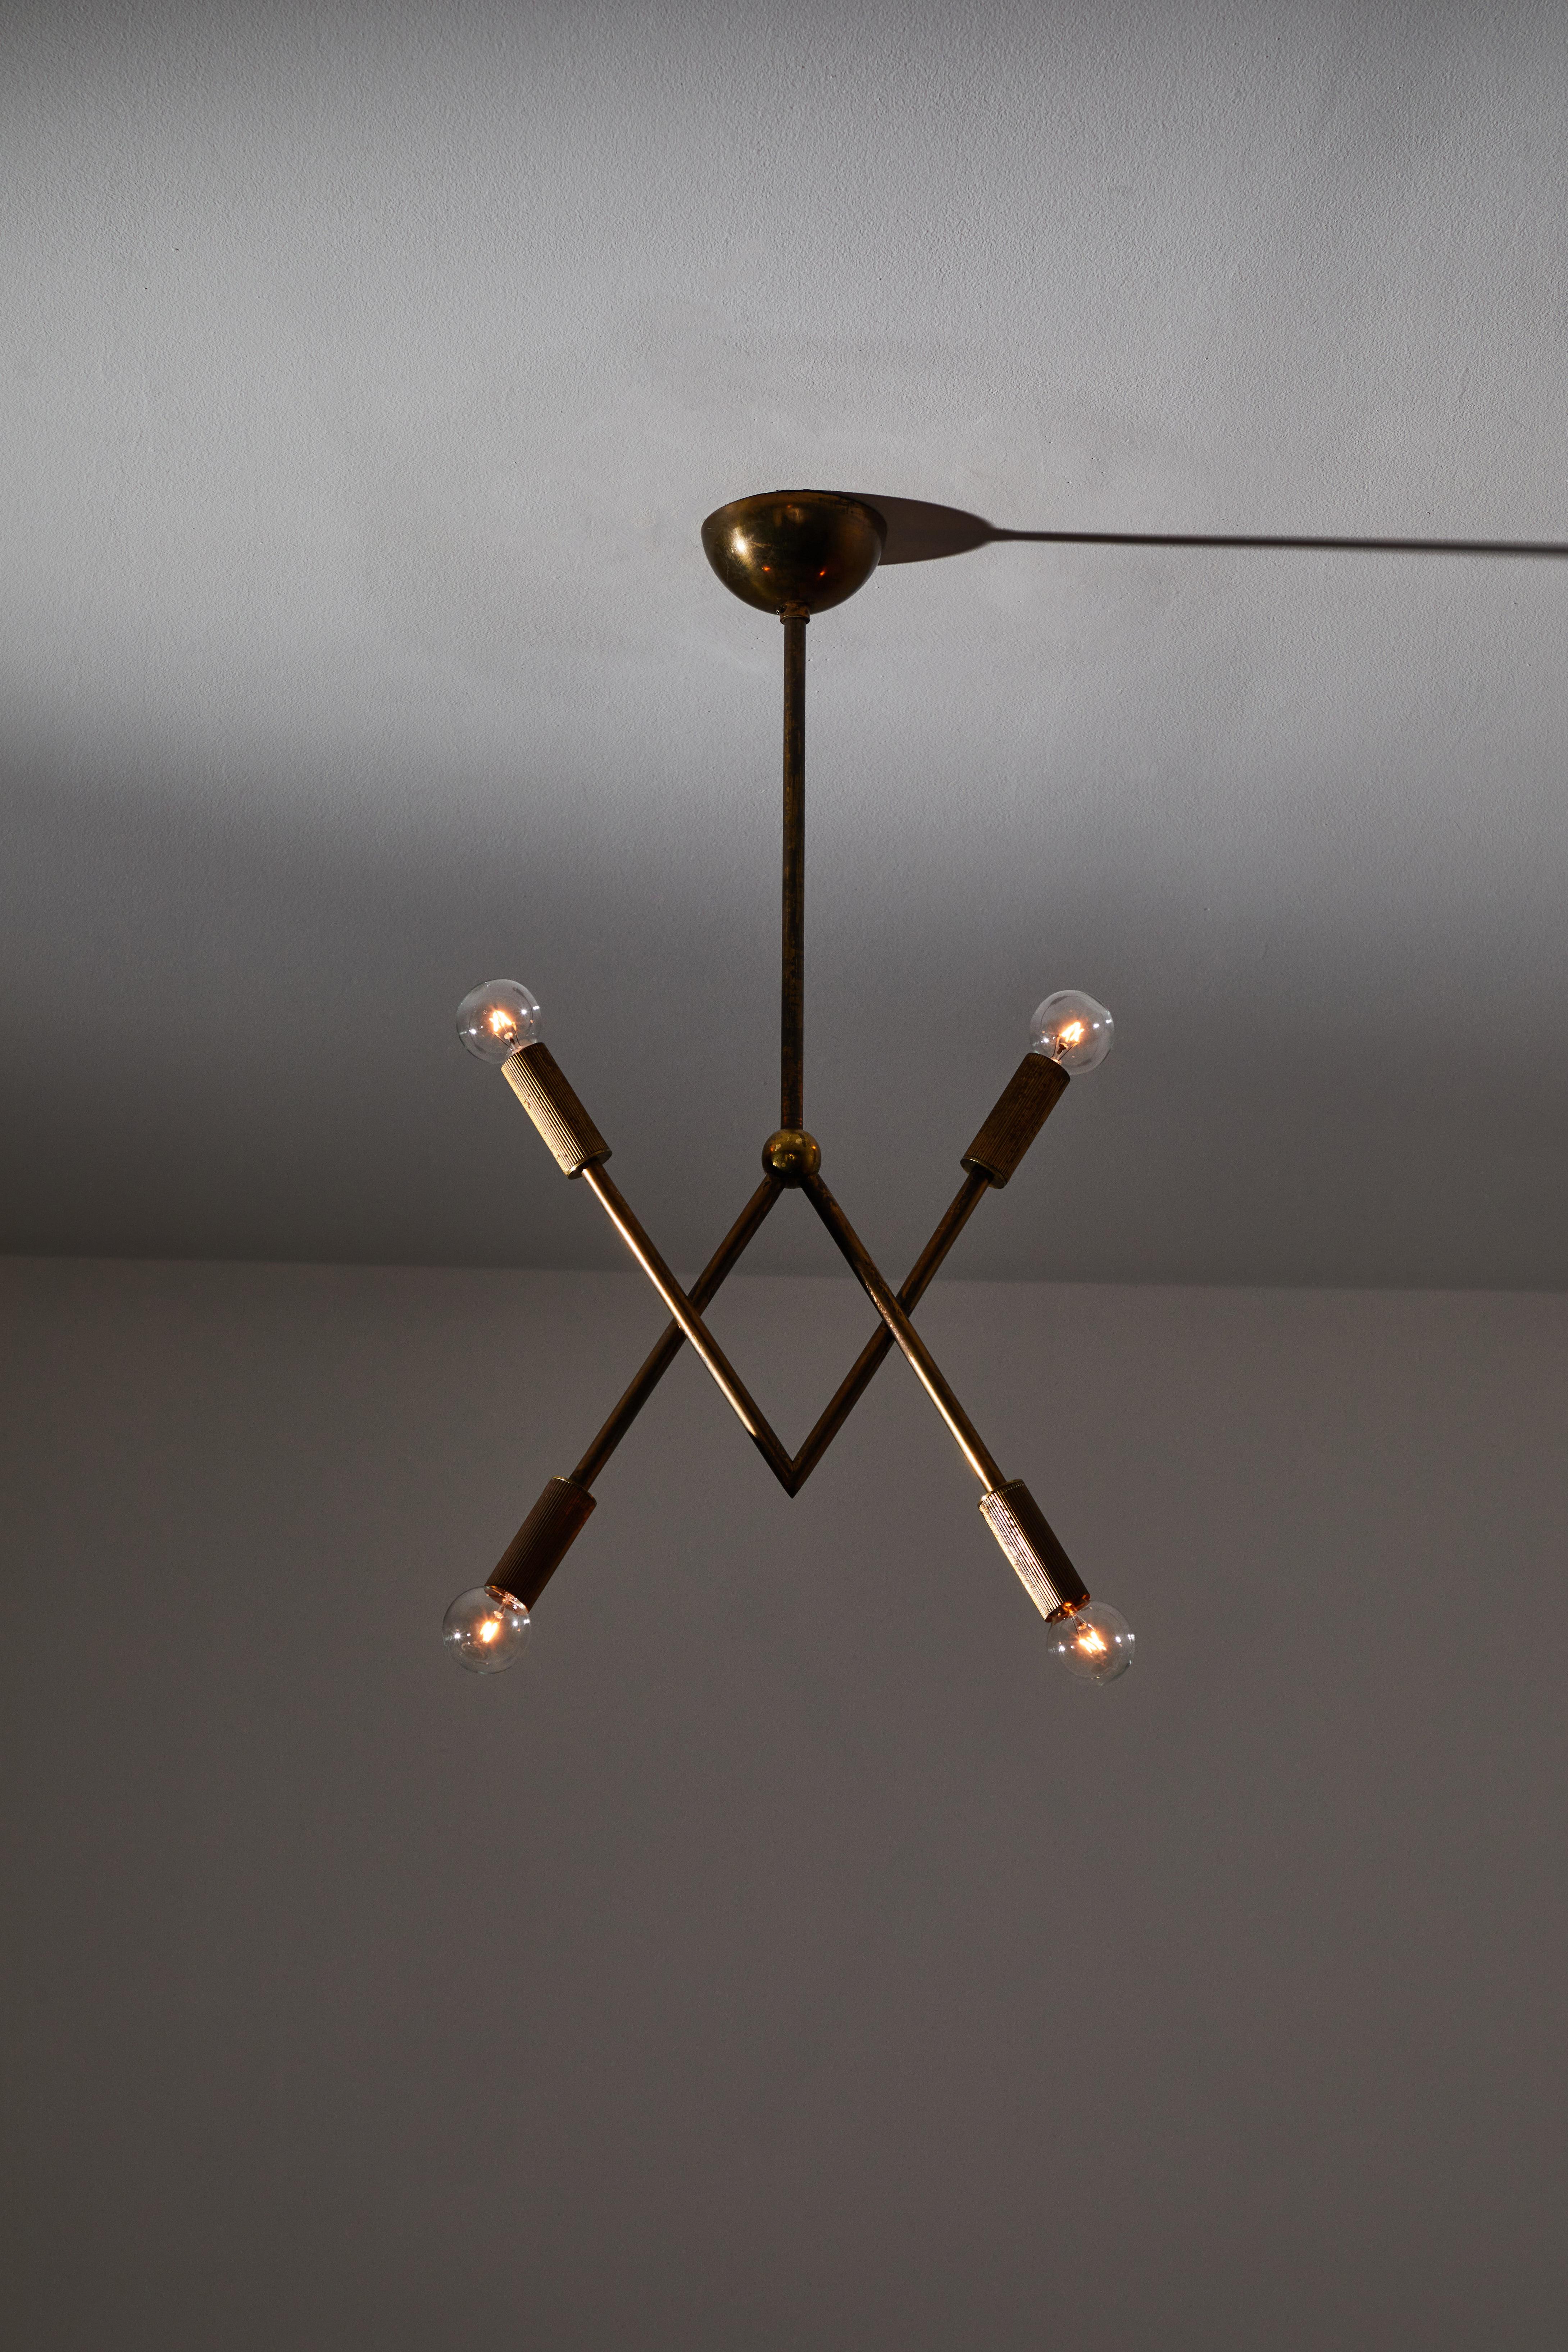 Rare suspension light by Guglielmo Ulrich. Designed in Italy, circa 1930s. Brass. Rewired for U.S. standards. Original canopy. We recommend four E27 candelabra 60w maximum bulbs. Bulbs provided as a one time courtesy.